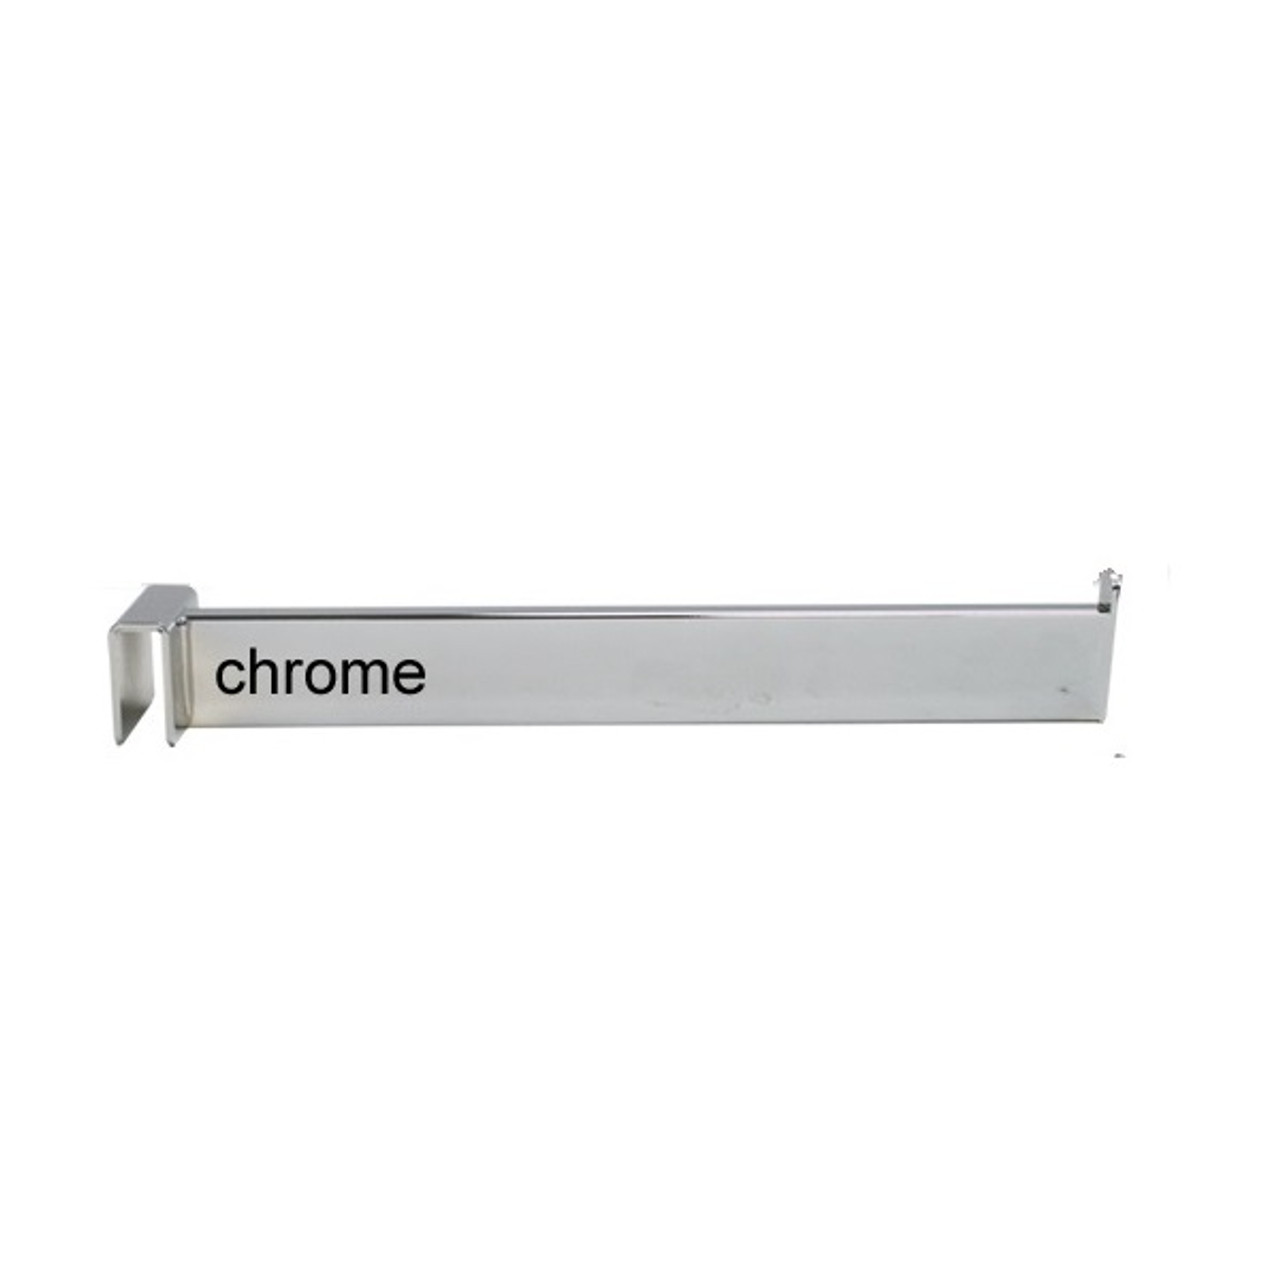 Chrome RH12 12" Faceouts for Rectangular Tubing